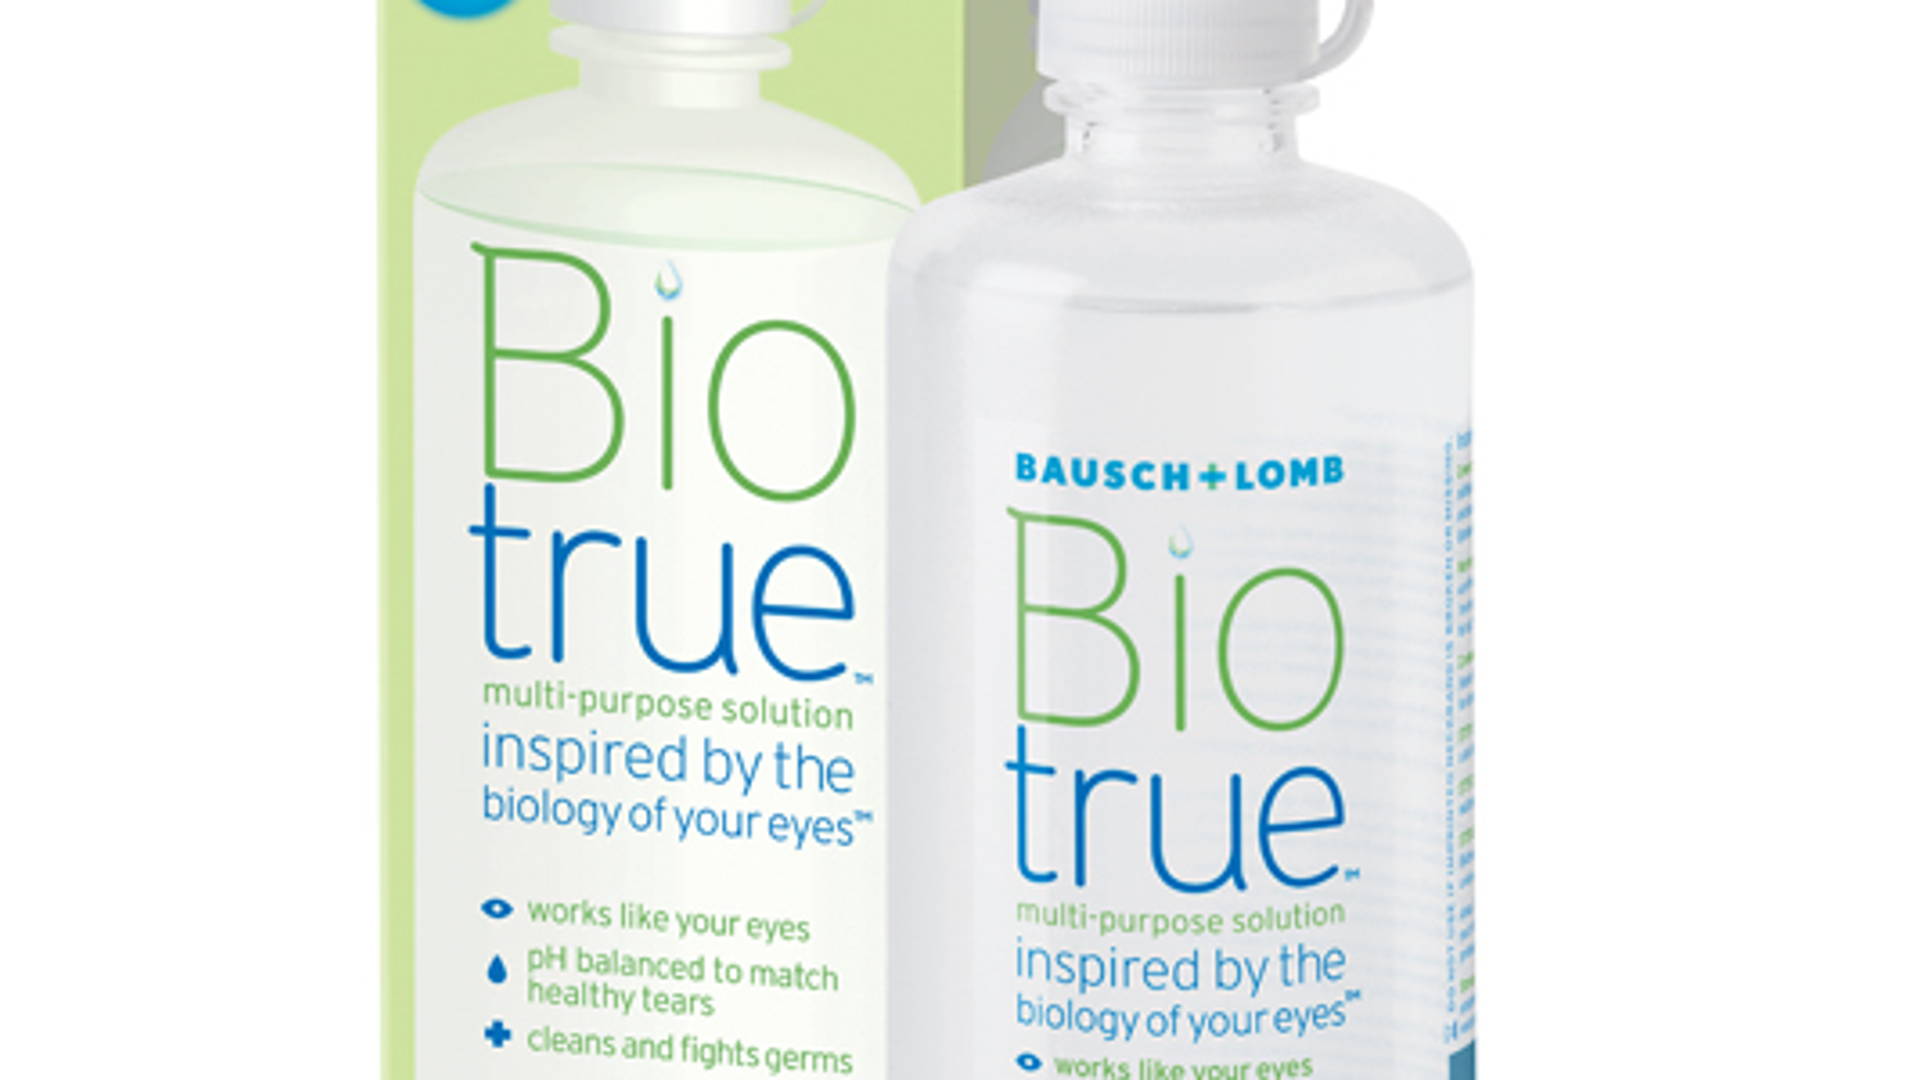 Featured image for Bausch + Lomb Biotrue